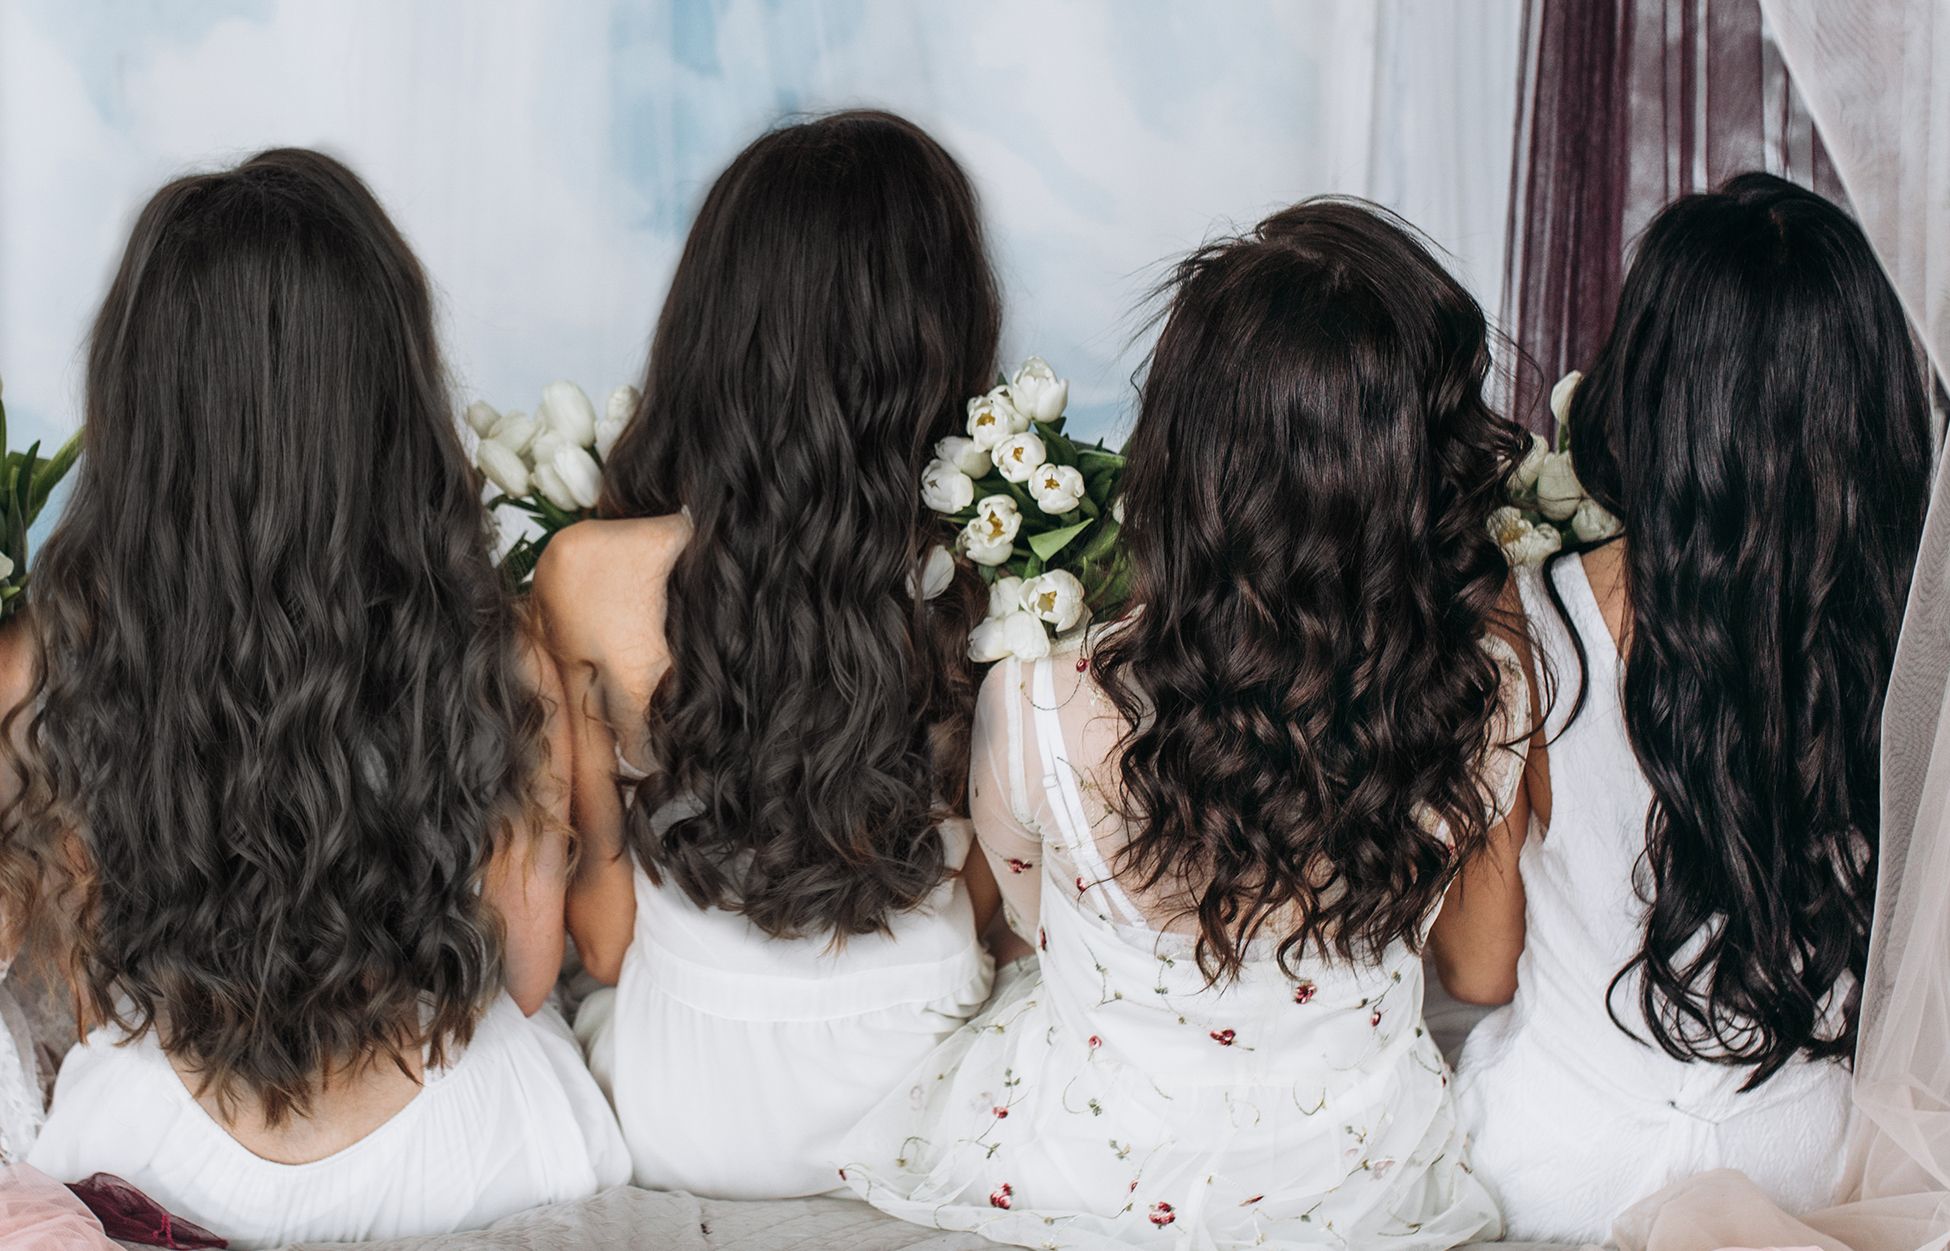  women with long shiny hair, with their backs to the camera